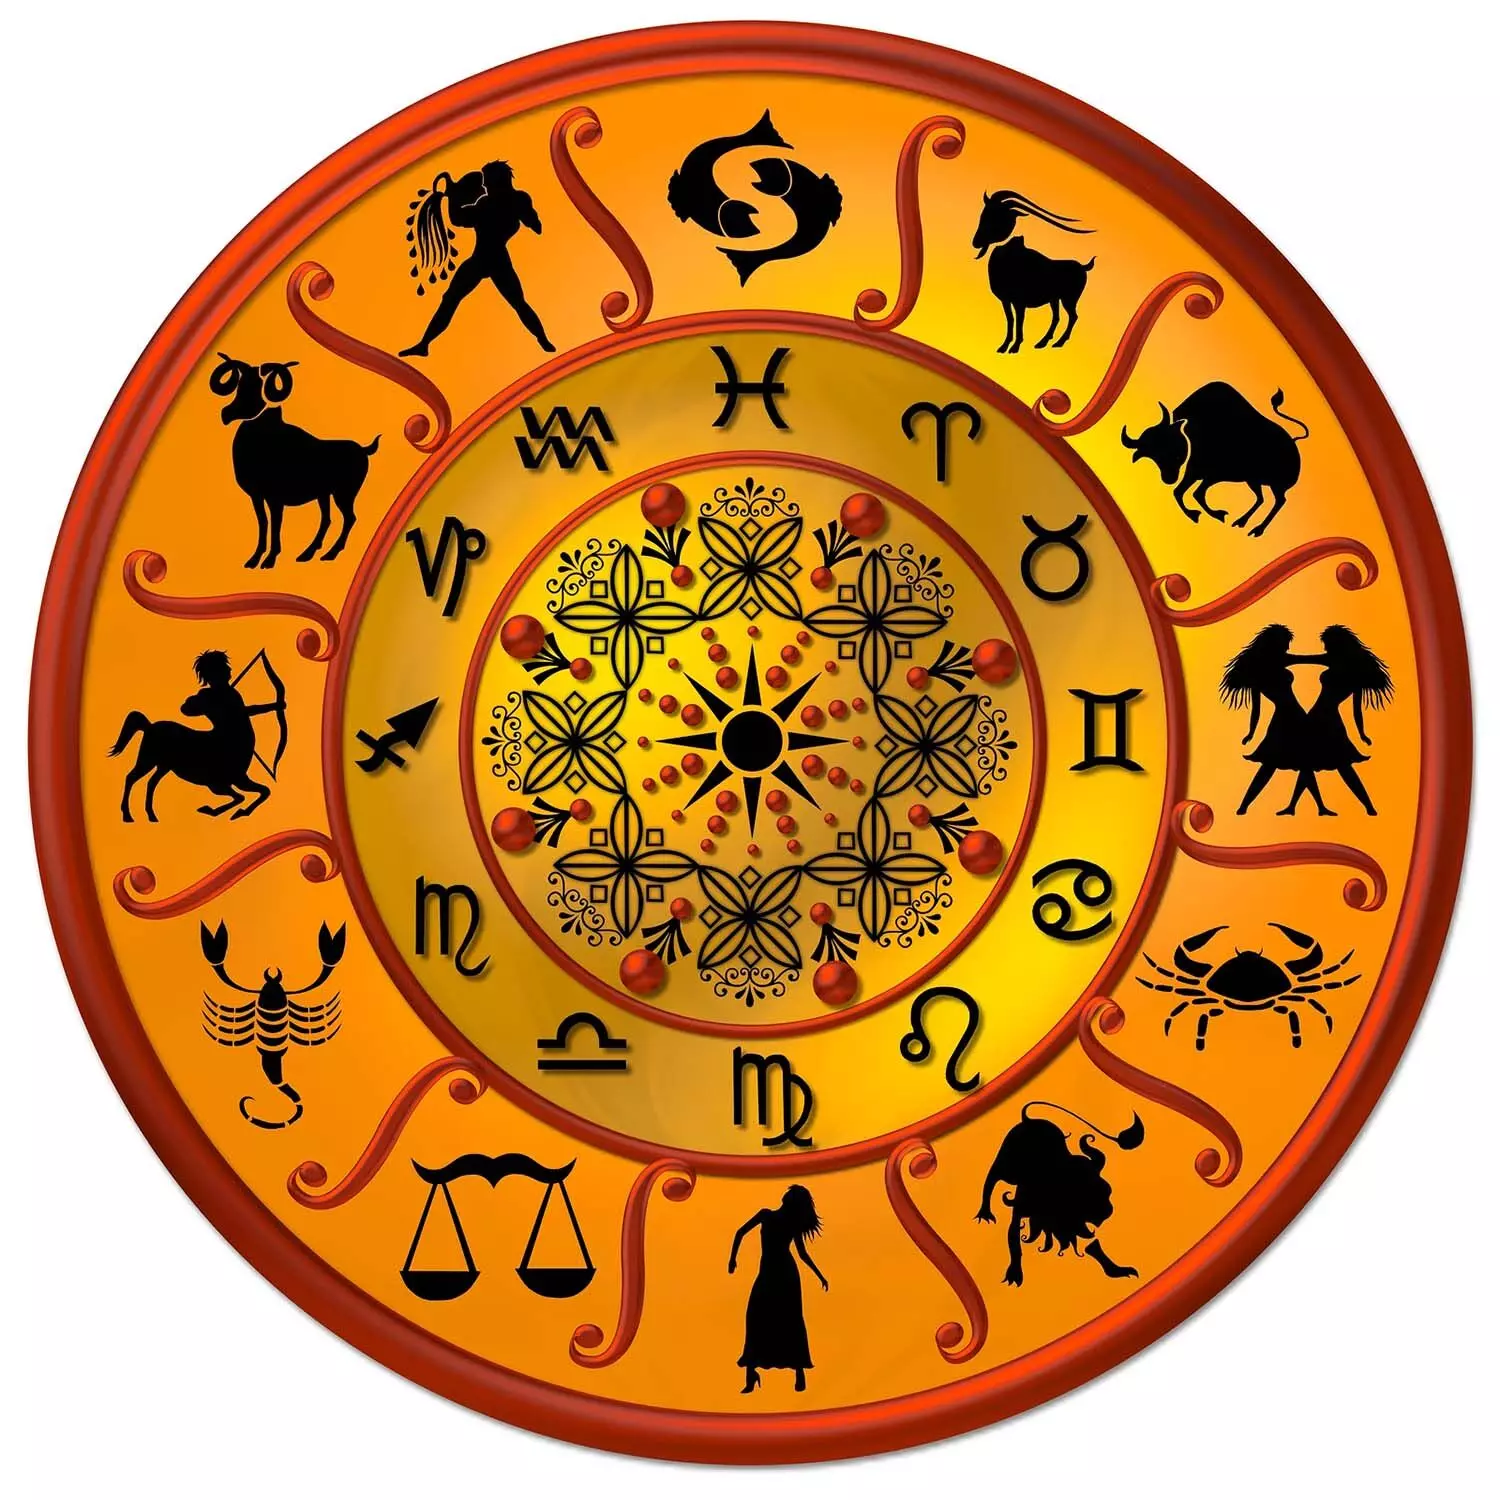 05 July – Know your todays horoscope